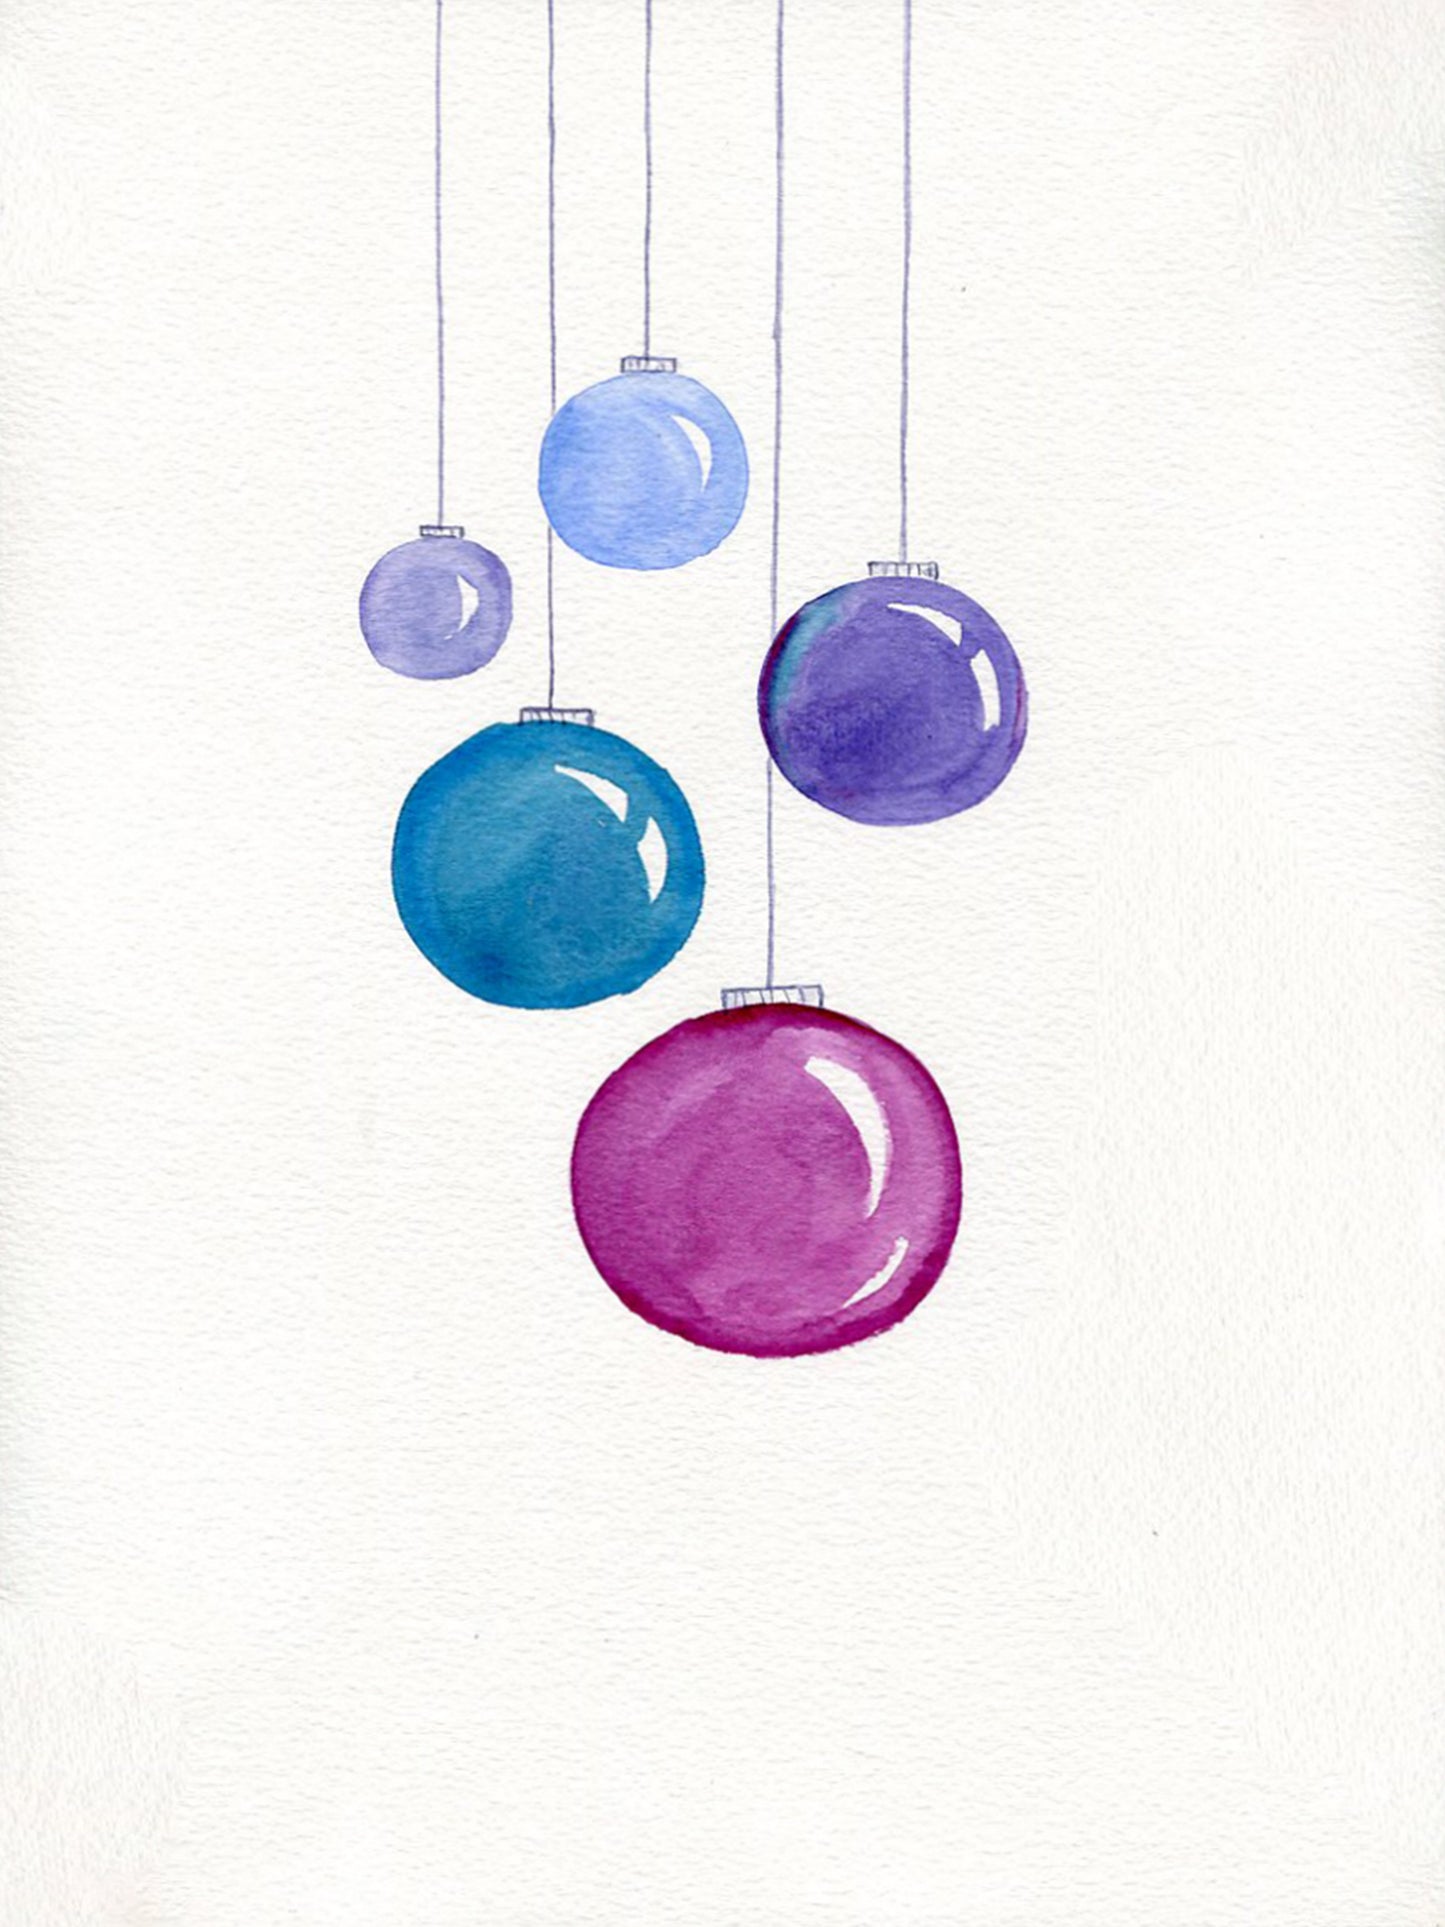 Christmas balls. New Year's Eve drawing